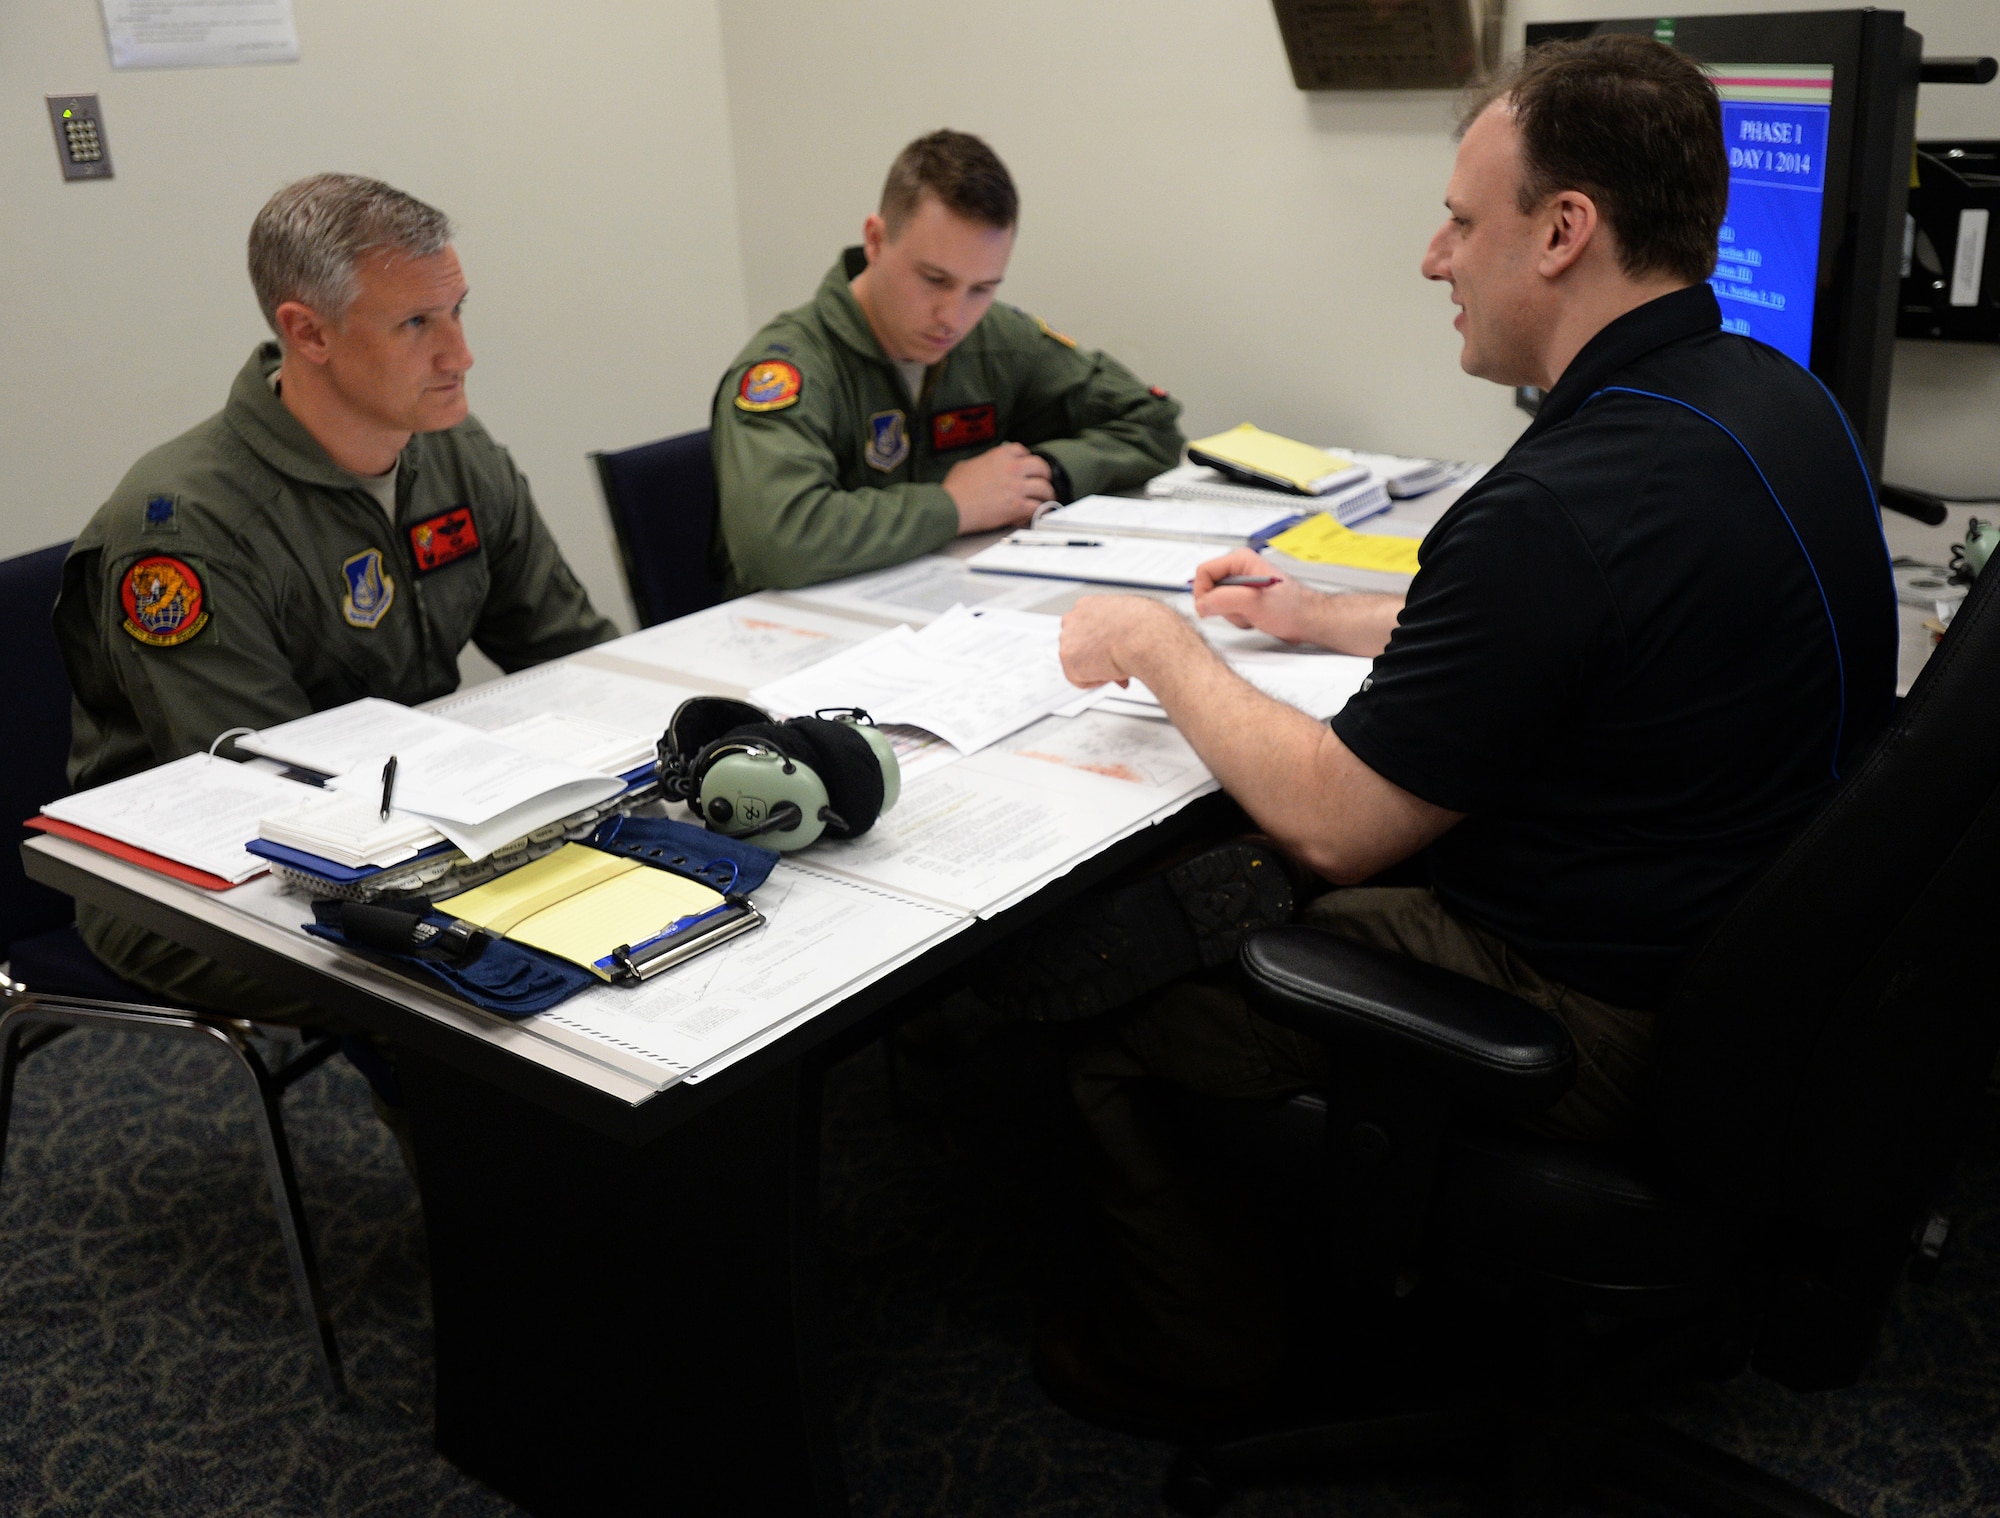 Lt. Col. Gregg Johnson, 535th Airlift Squadron commander, and 1st Lt. Taylor Ragland, 535th AS pilot, receive a pre-training brief from Benjamin Slinkard, a C-17 Globemaster III pilot instructor, during a quarterly training session at Joint Base Pearl Harbor-Hickam, Hawaii, Feb. 18, 2014. Johnson and Ragland are C-17 pilots, and train extensively using a C-17 simulator, designed to give pilots a realistic feel for in-air tactical and emergency operations. (U.S. Air Force photo/Staff Sgt. Alexander Martinez)